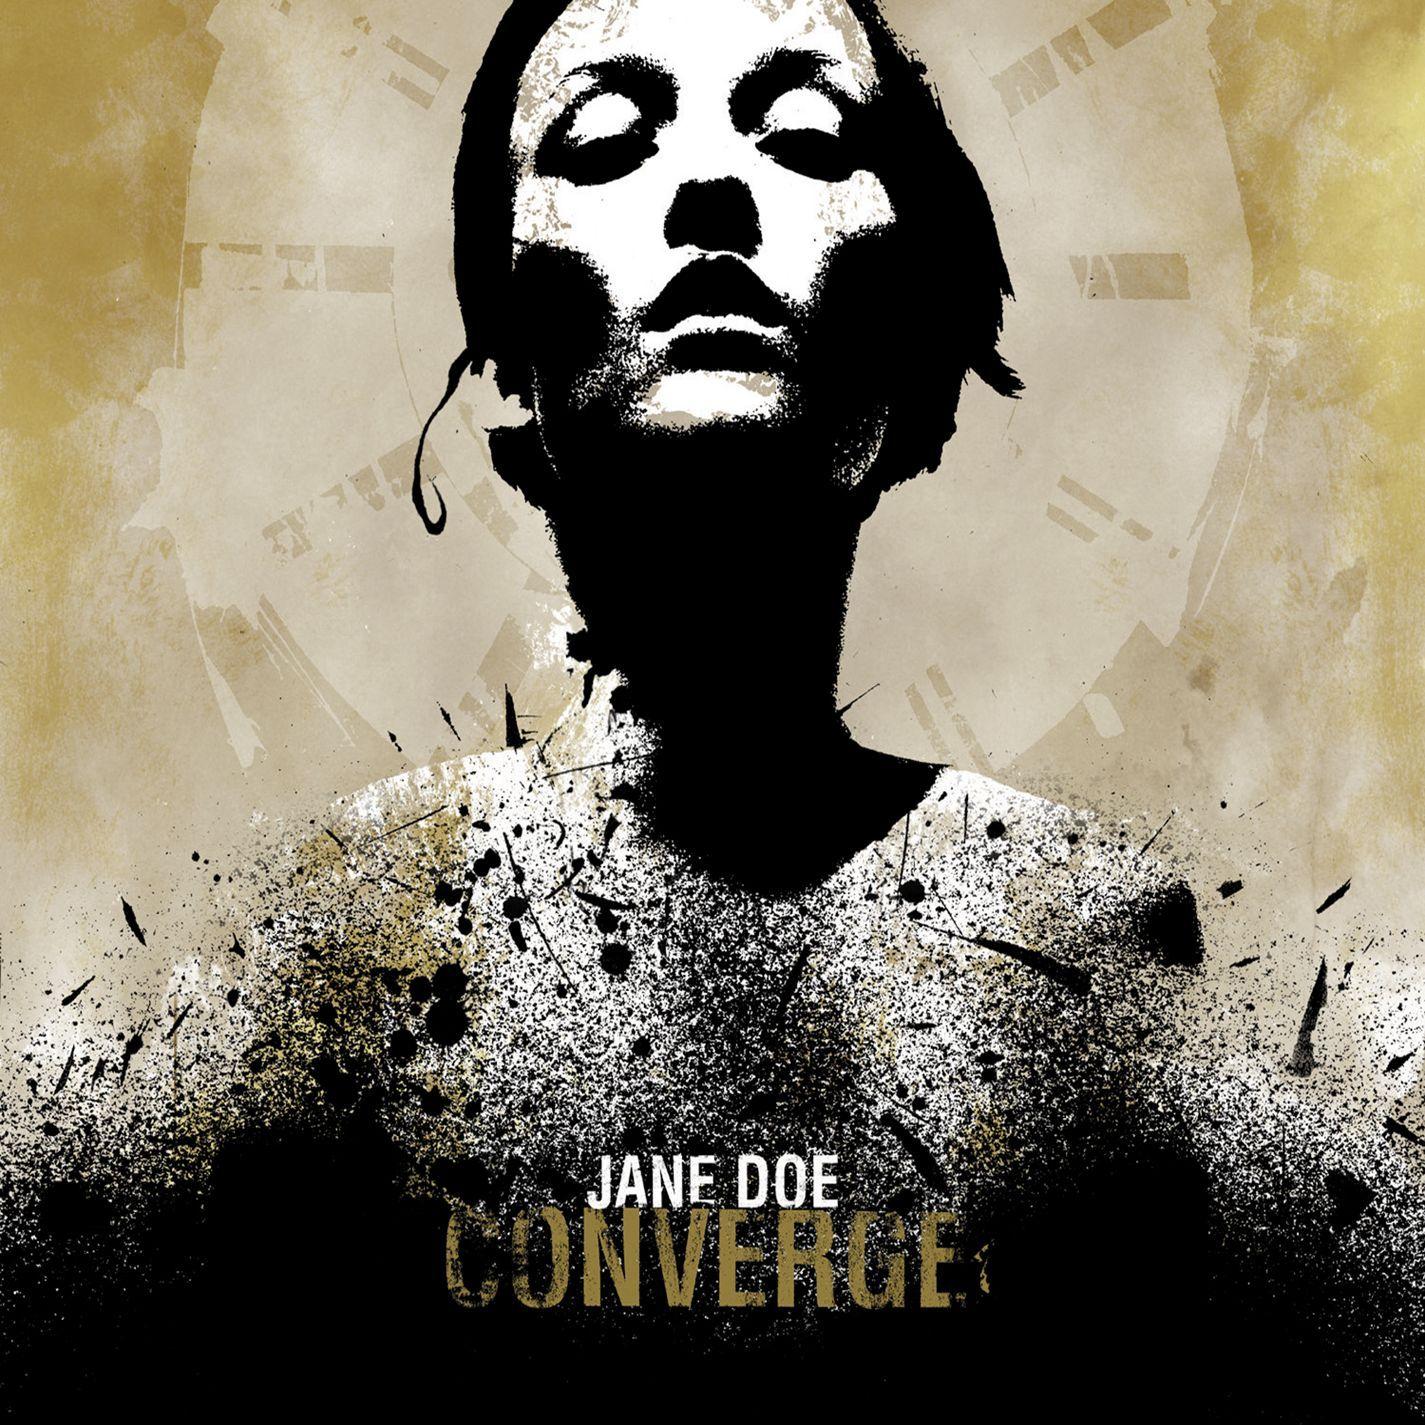 Converge's Jane Doe. Incredible Art and Album Covers in 2019